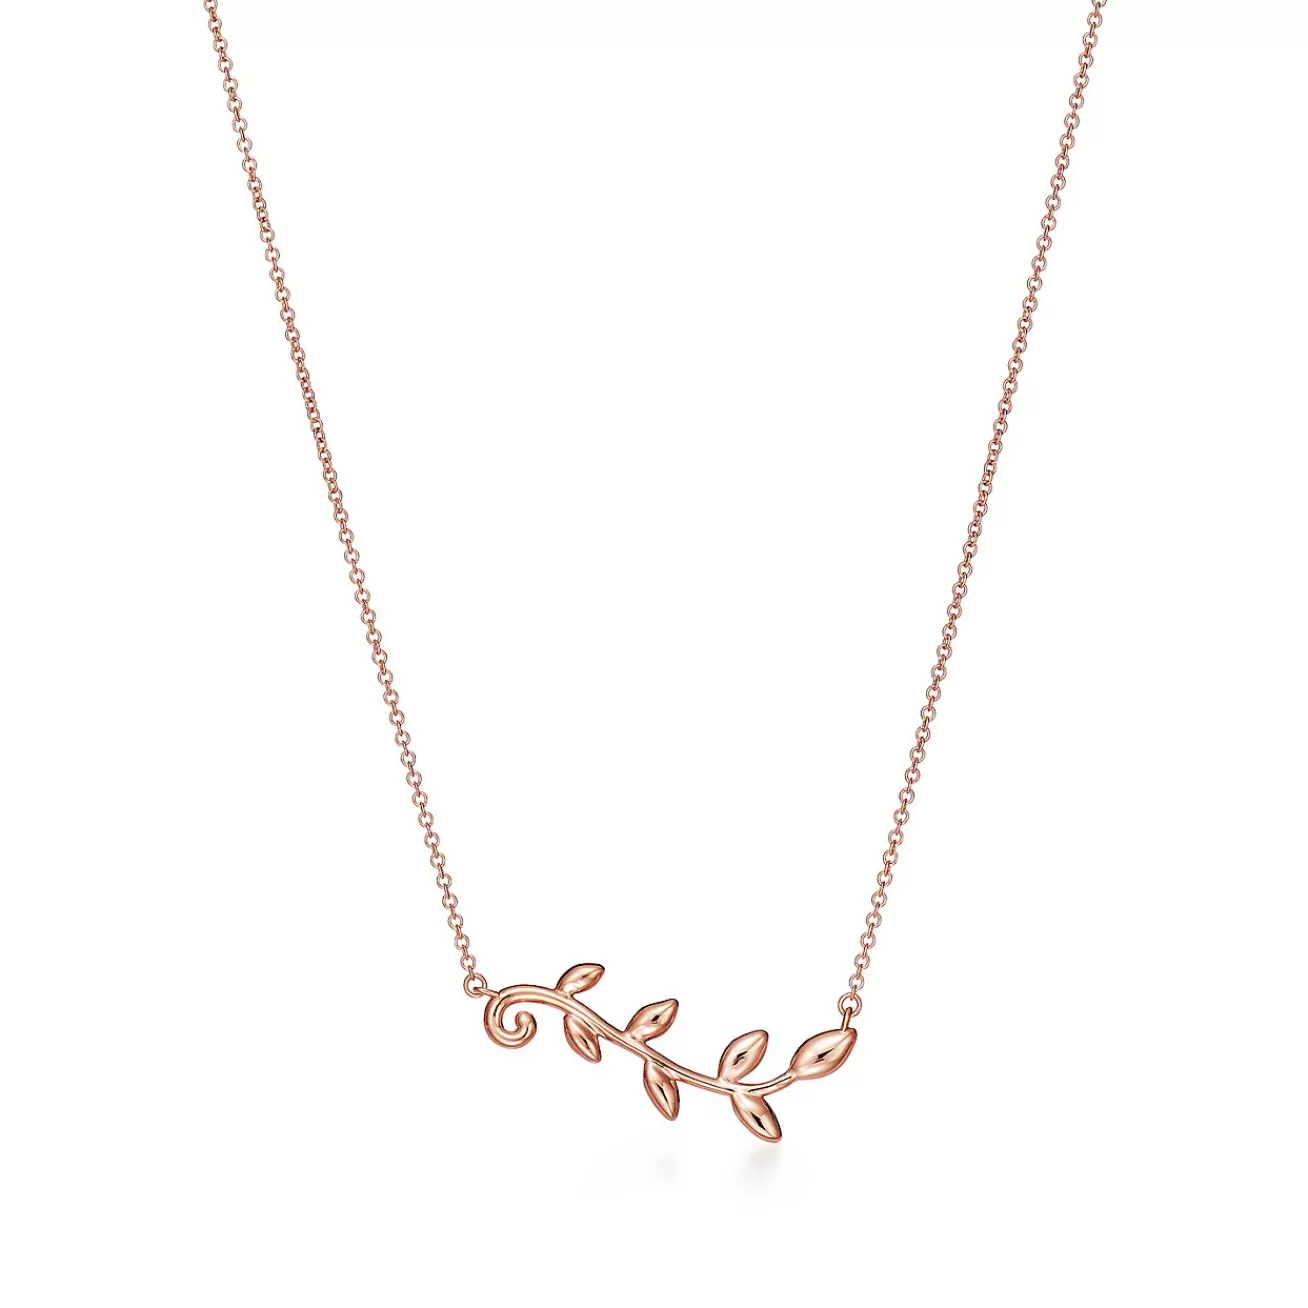 Tiffany & Co. Paloma Picasso® Olive Leaf vine pendant in 18k rose gold. | ^ Necklaces & Pendants | Rose Gold Jewelry